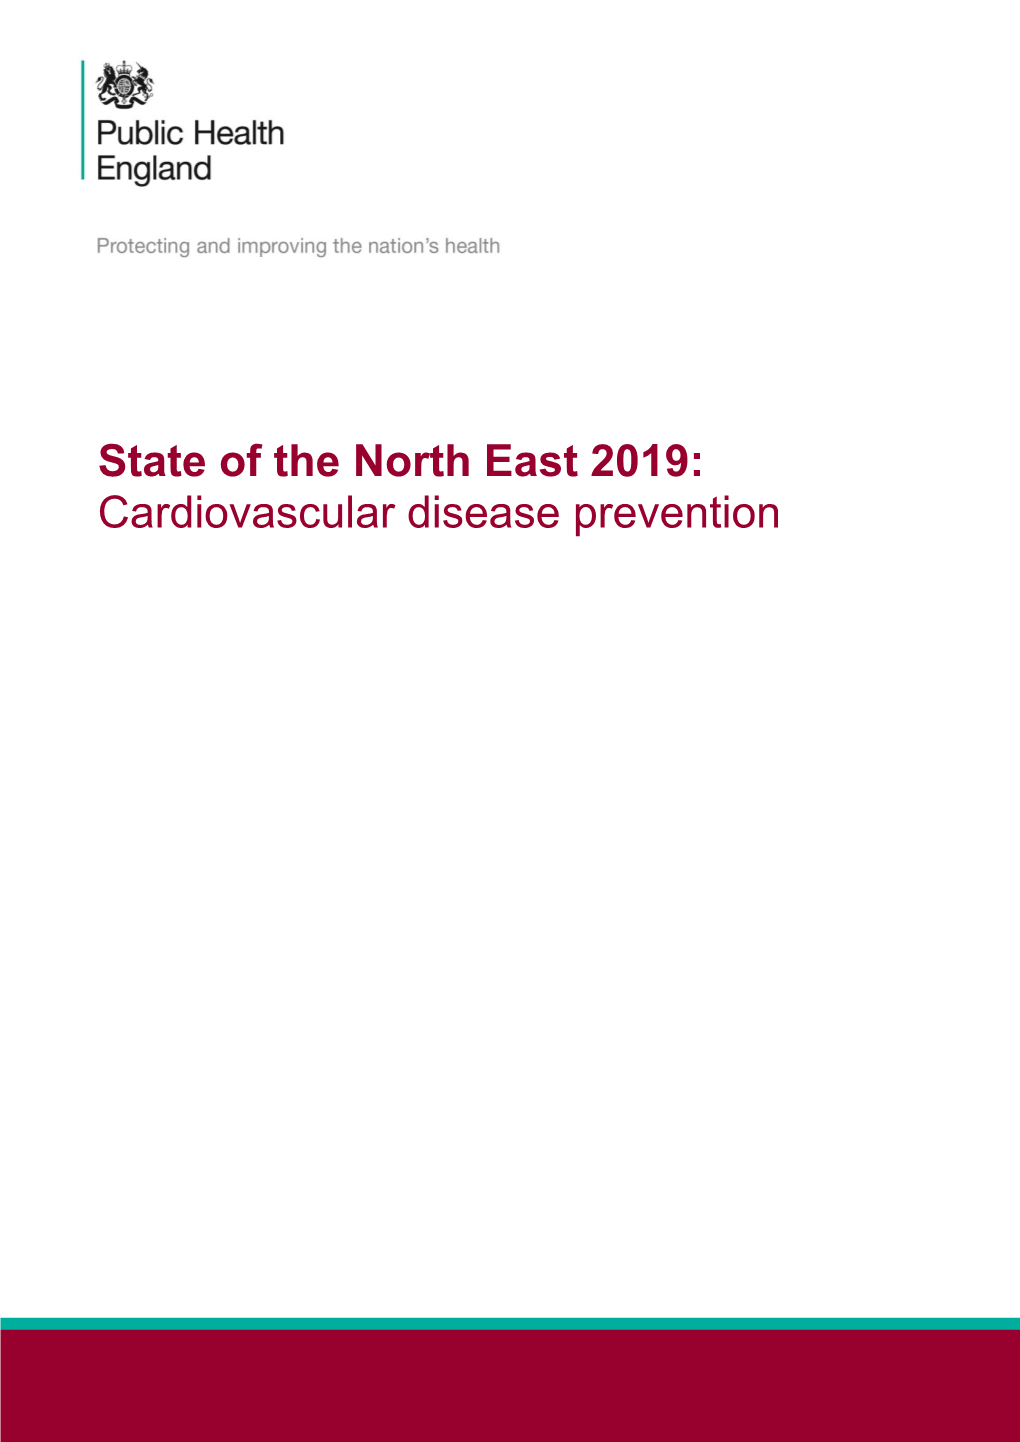 State of the North-East 2019: Cardiovascular Disease Prevention